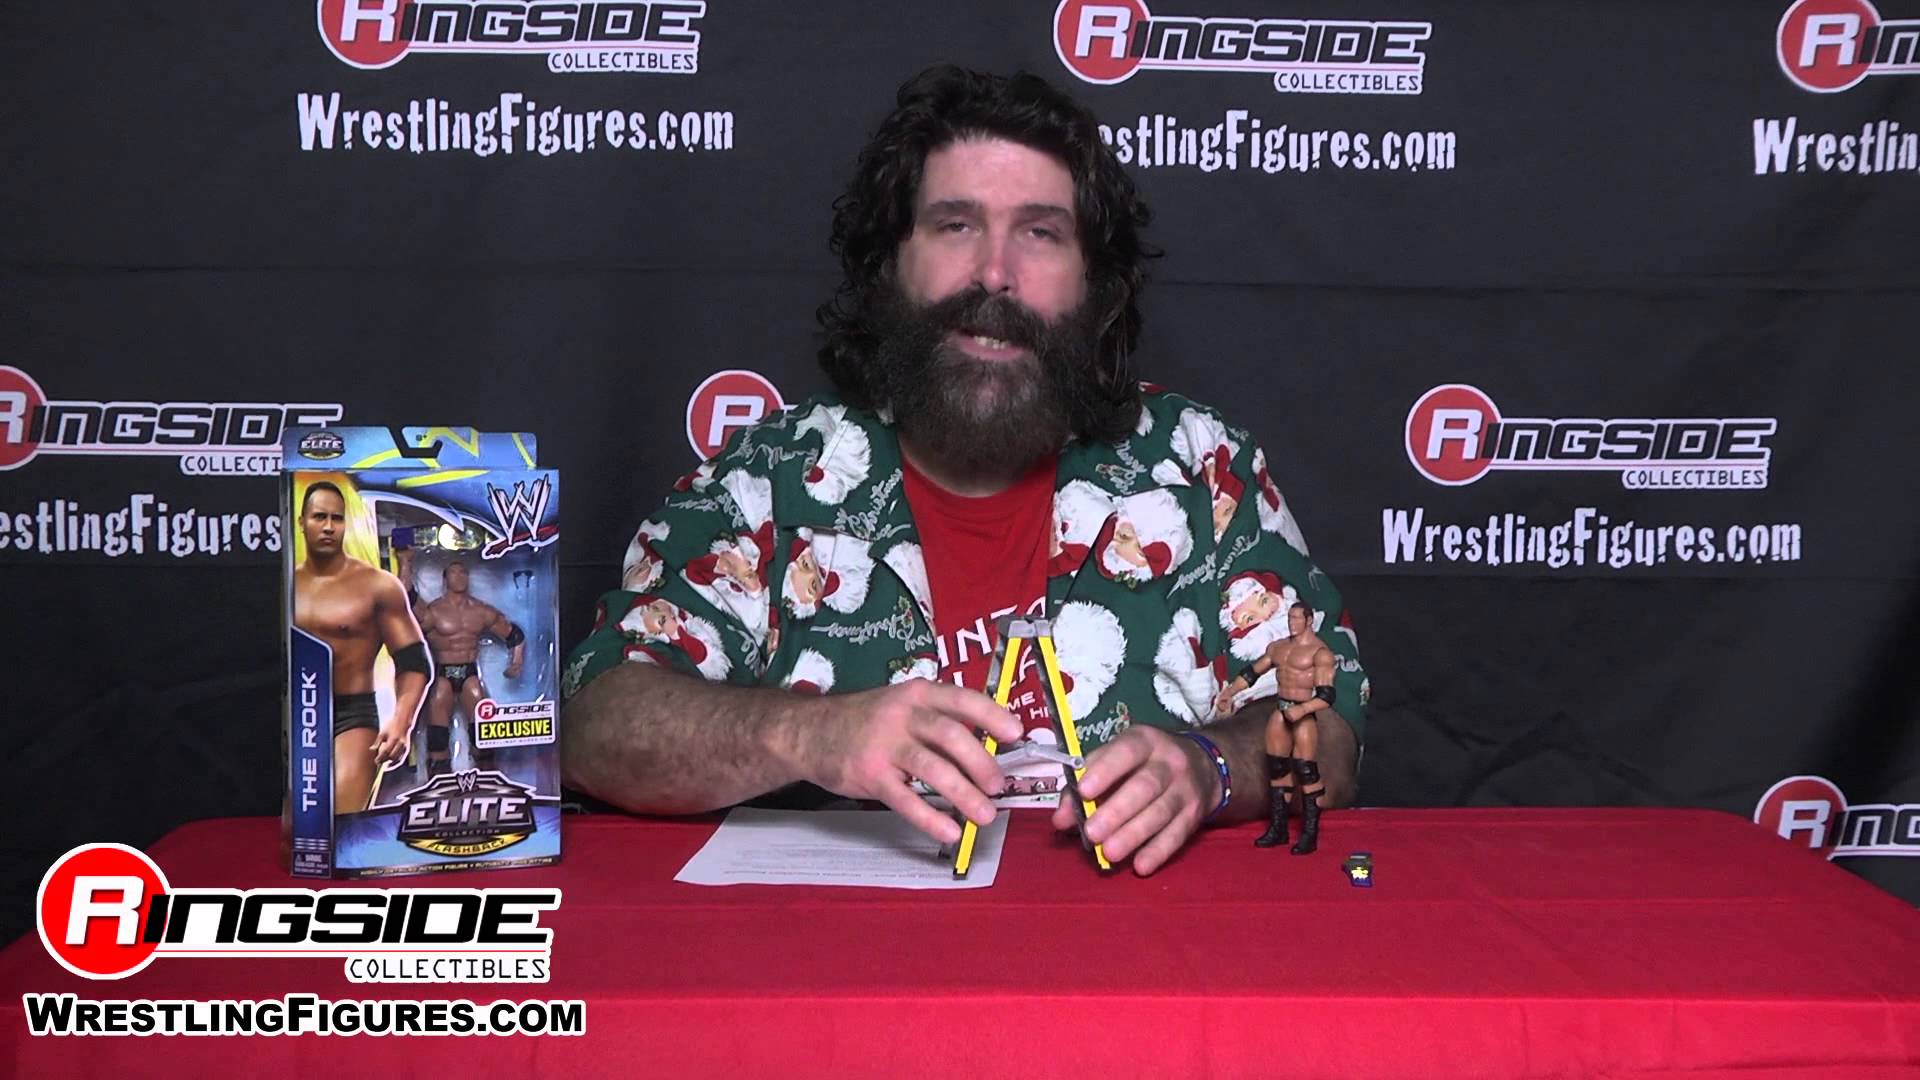 TOY TIME WITH MICK FOLEY: The Rock Ringside Collectibles Exclusive